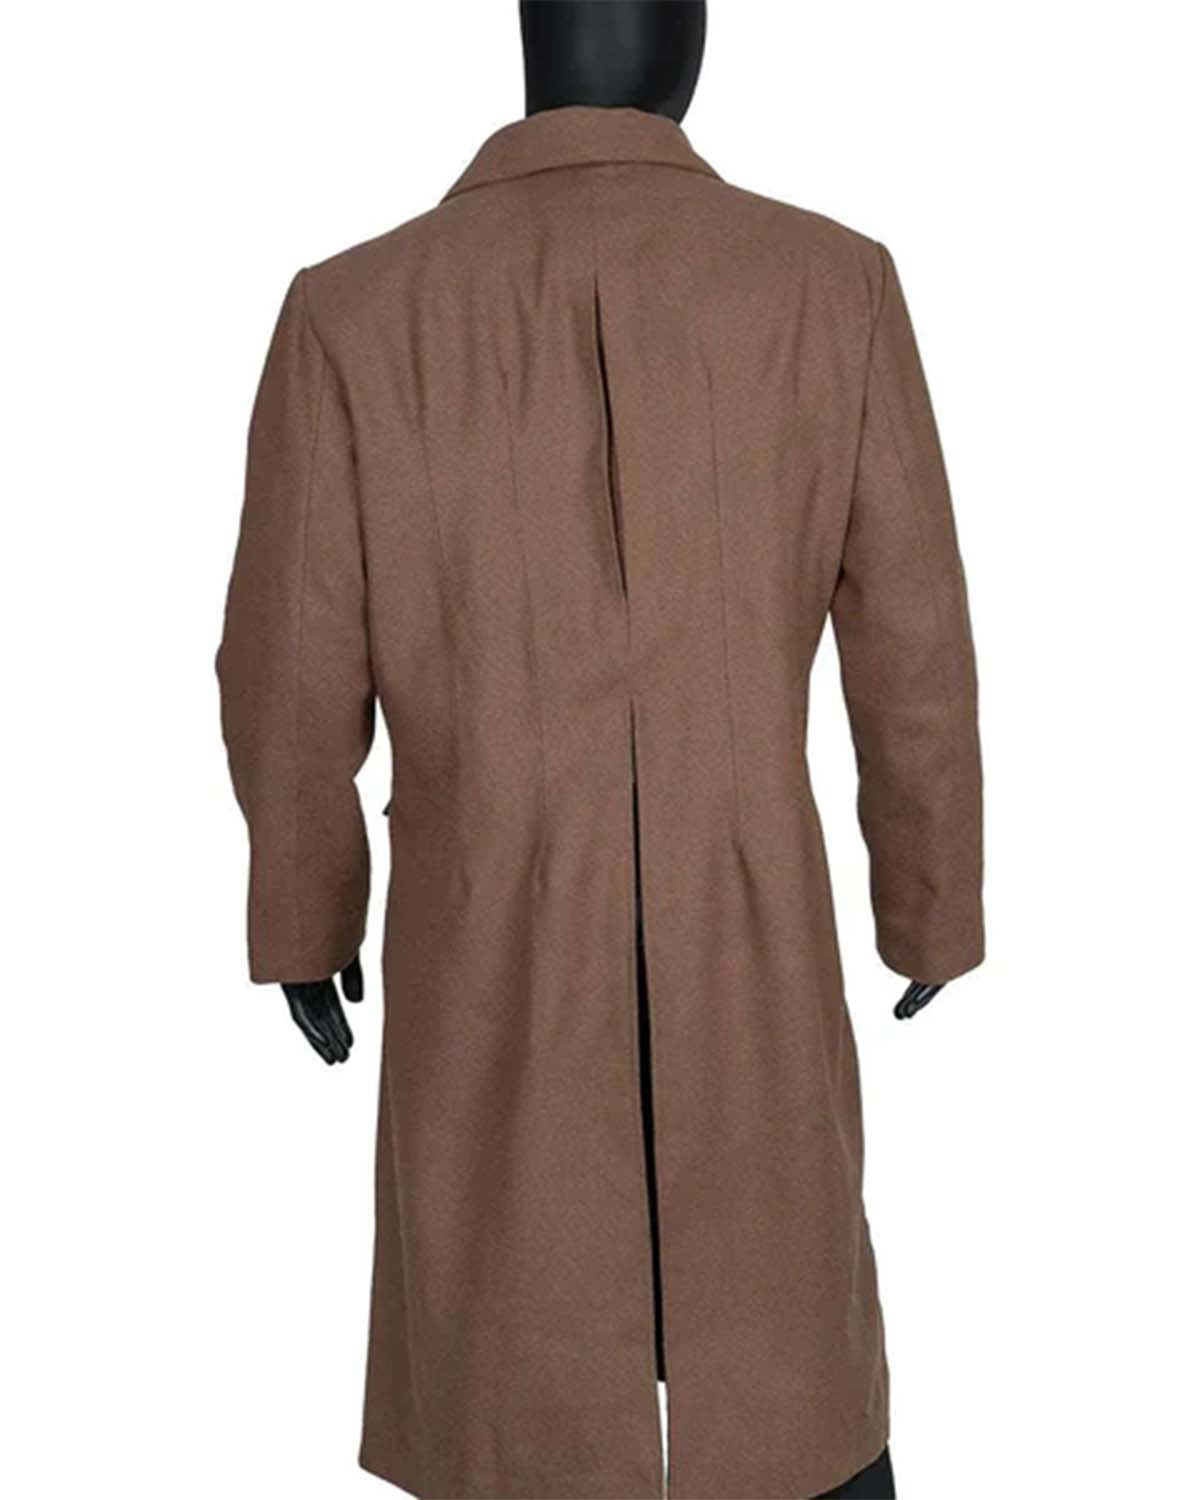 Elite Doctor Who 10th Doctor Trench Coat